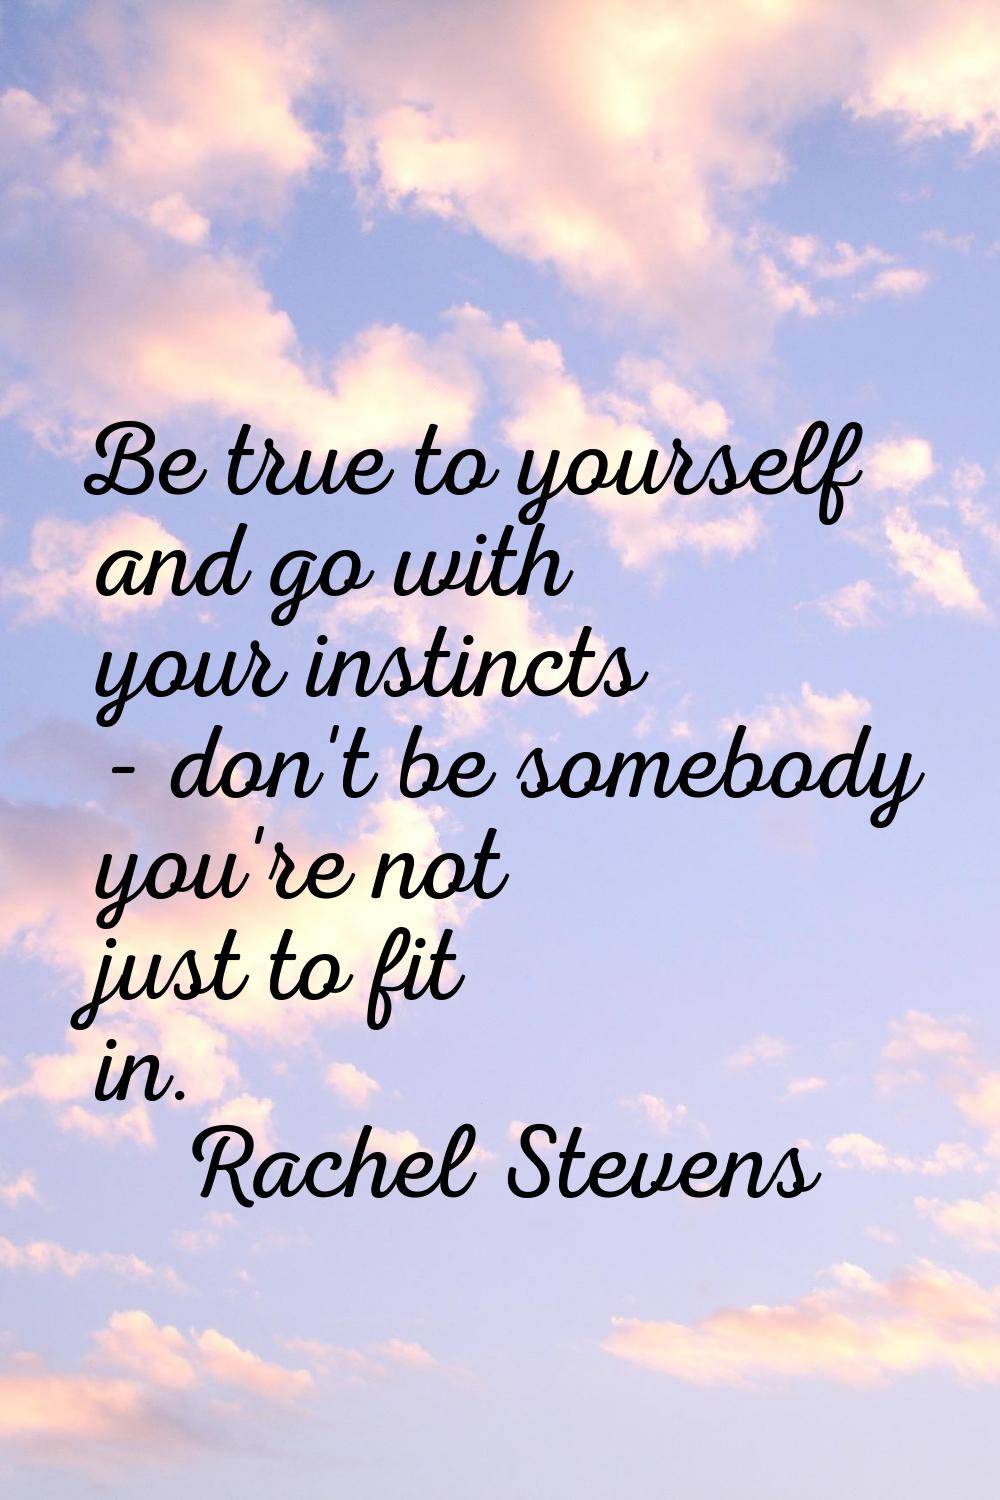 Be true to yourself and go with your instincts - don't be somebody you're not just to fit in.